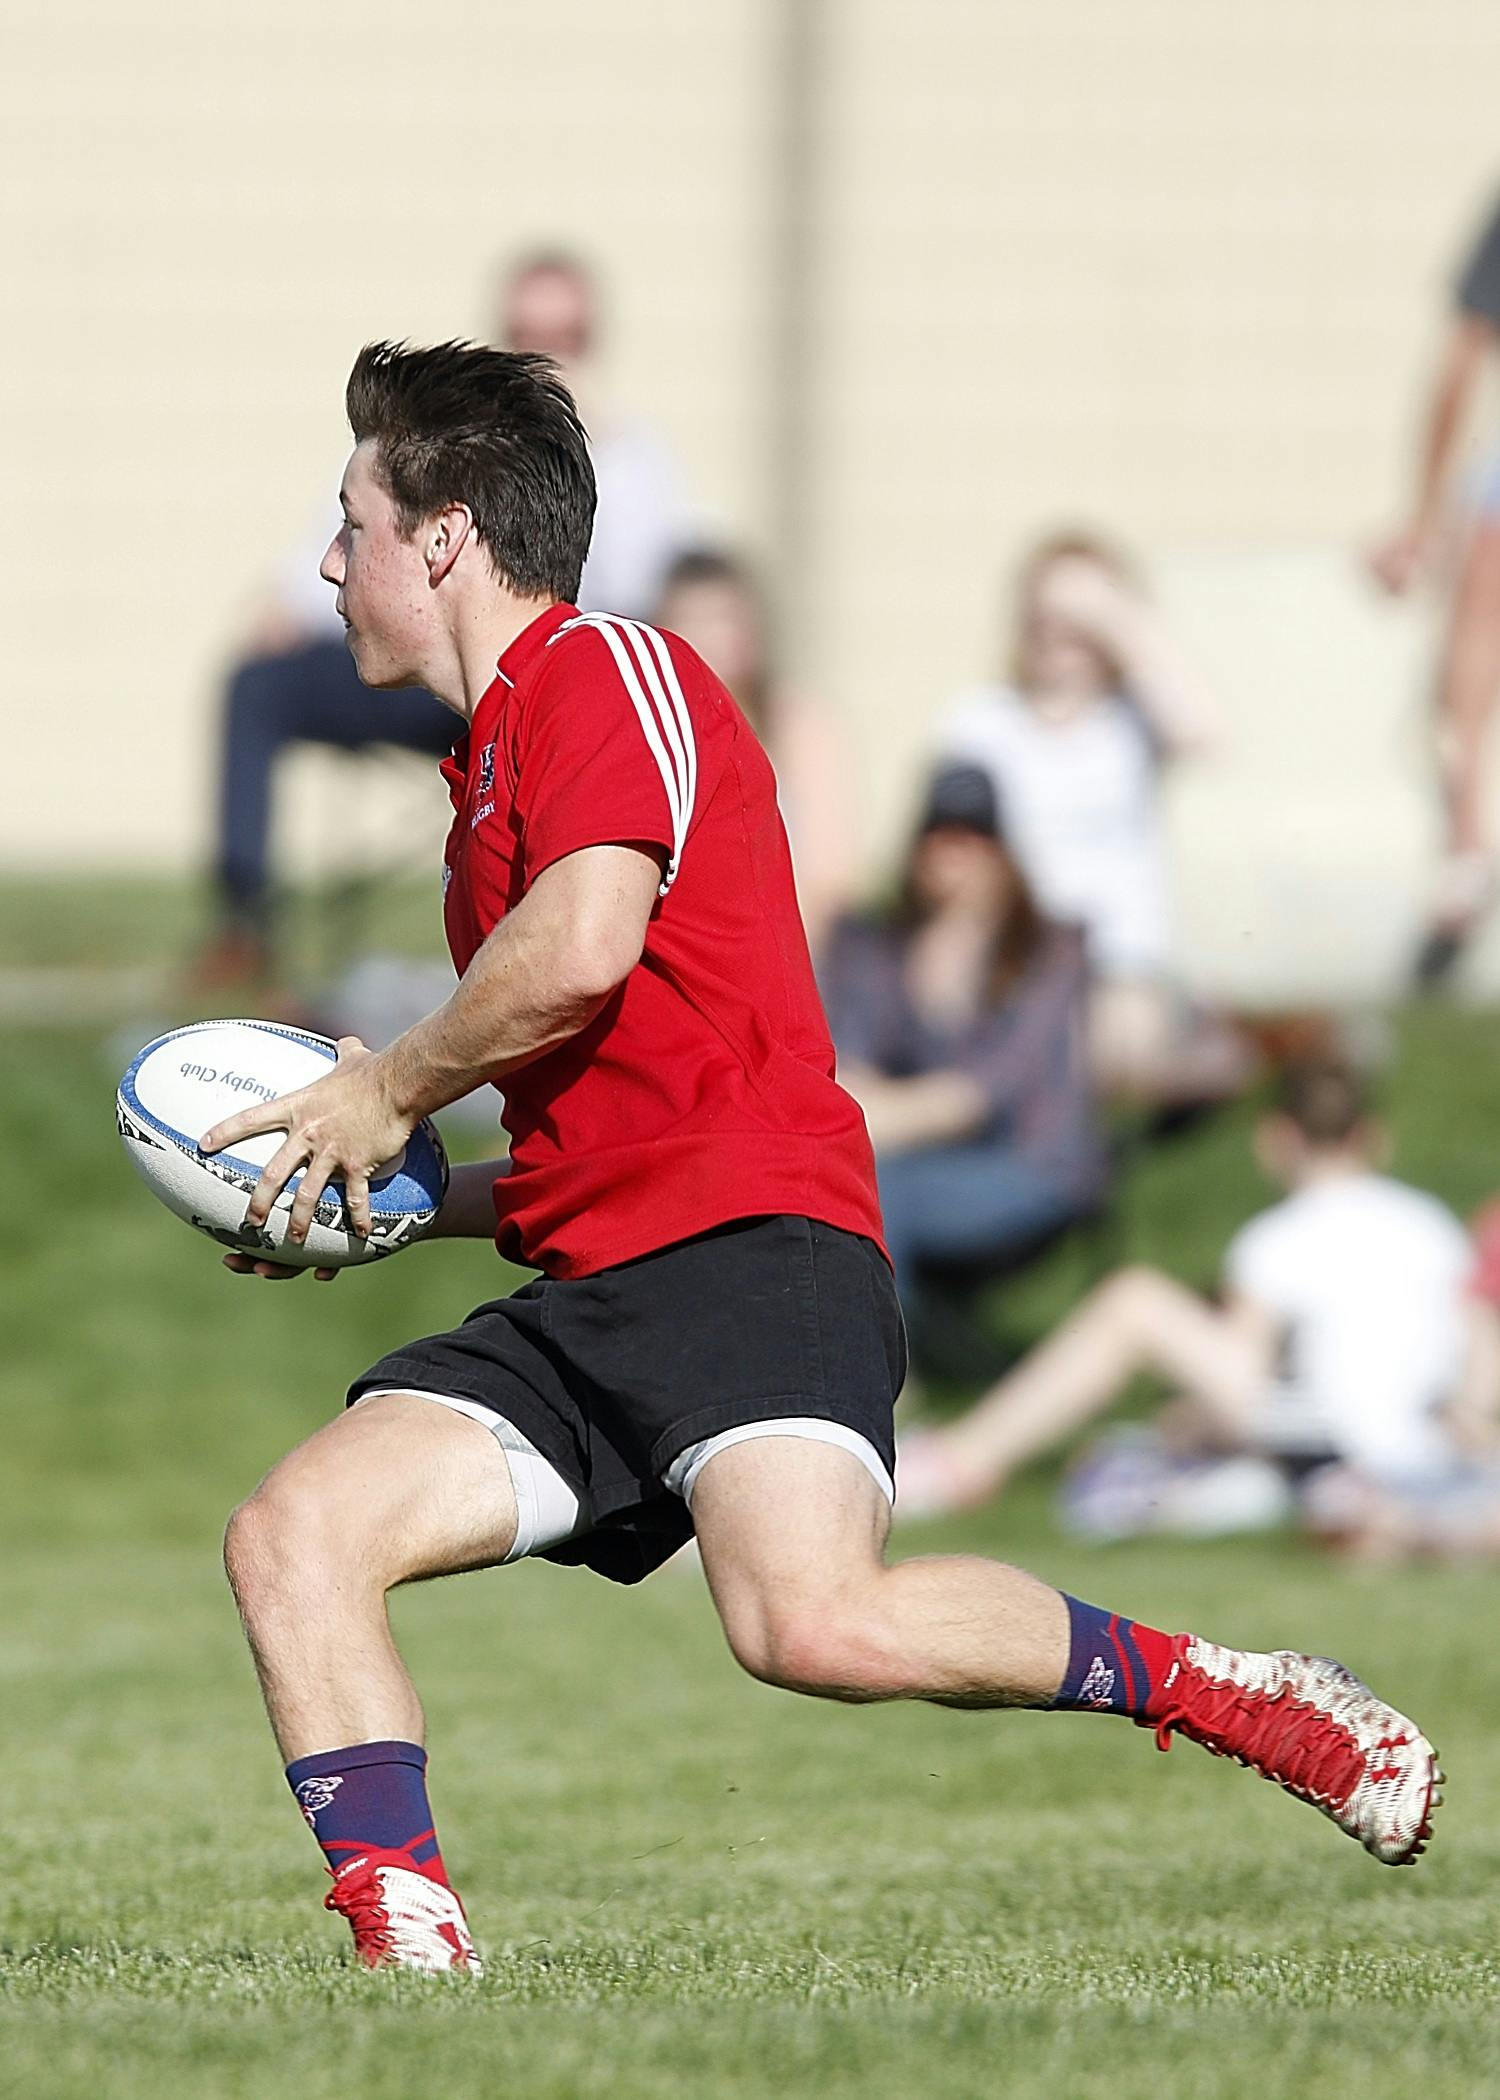 Man Playing Rugby at Daytime · Free Stock Photo